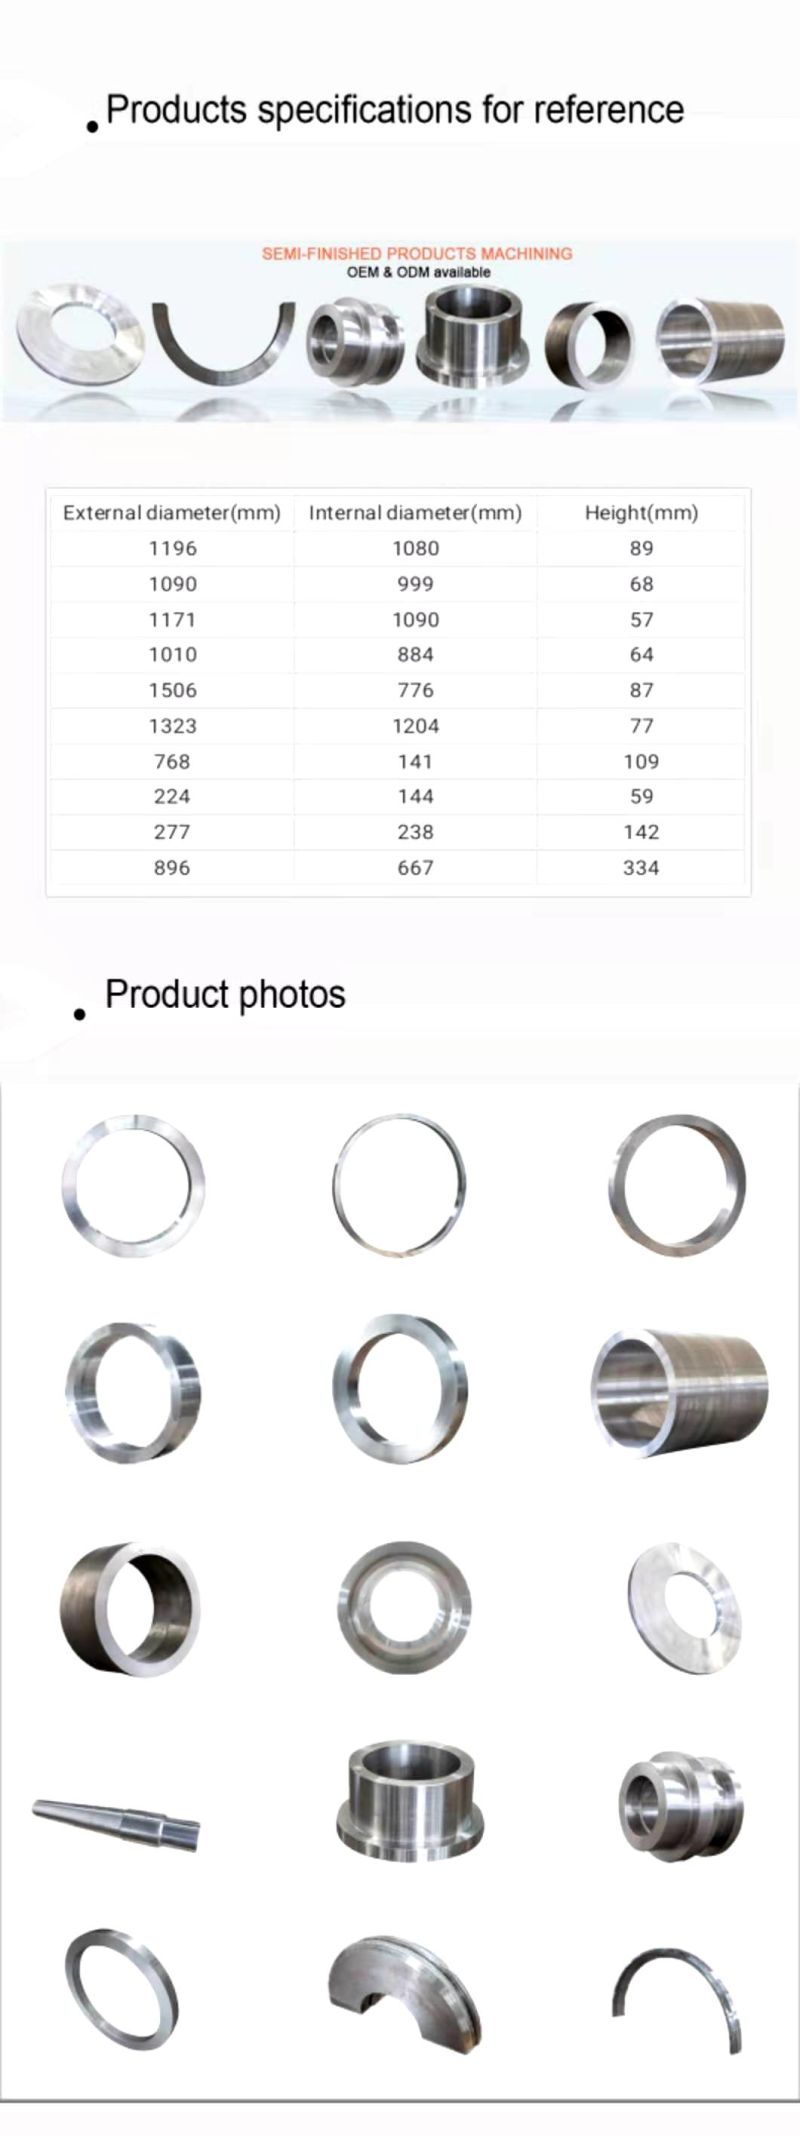 Customized Carbon Steel, Alloy Steel, Cold and Thermal Die Steel, Stainless Steel, Heat Resistant Steel, and Other High Alloy Steel Forgings